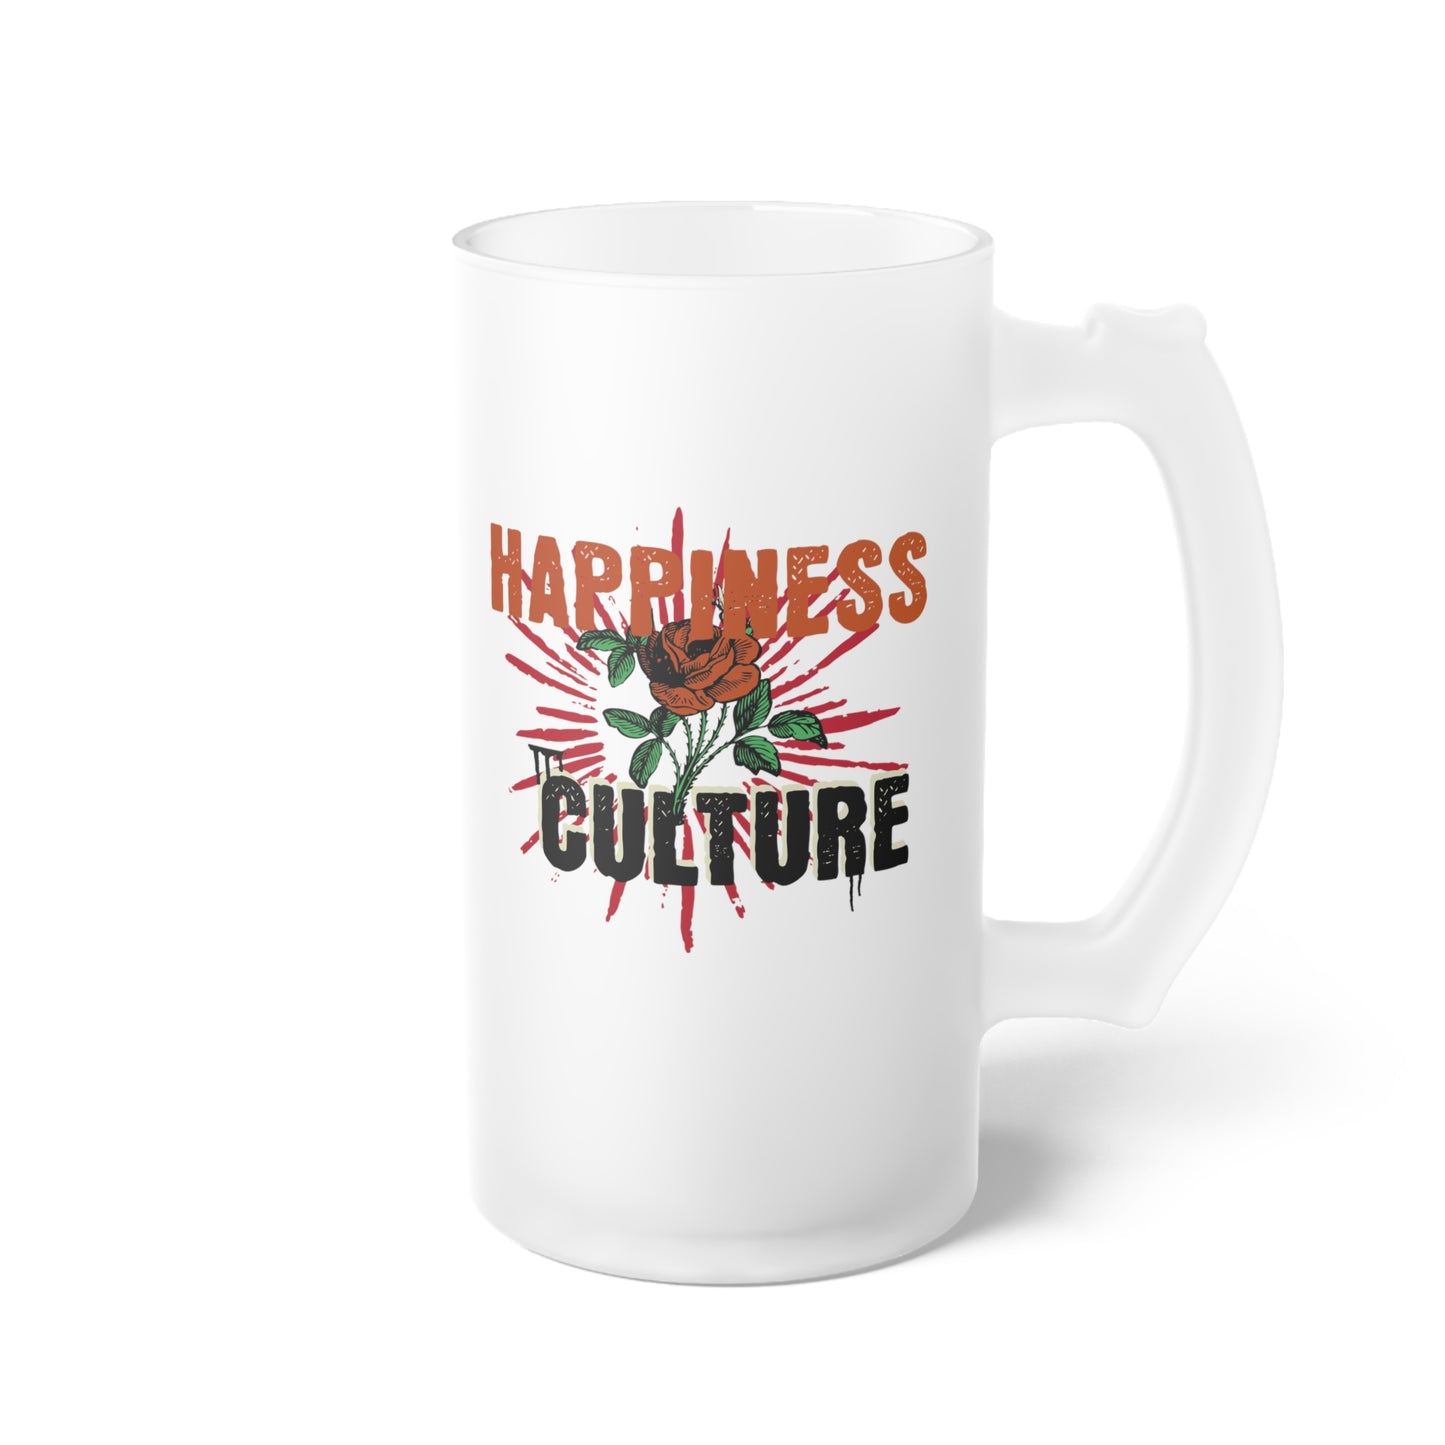 Happy-Hour Frosted Glass Beer Mug, Happiness Culture design